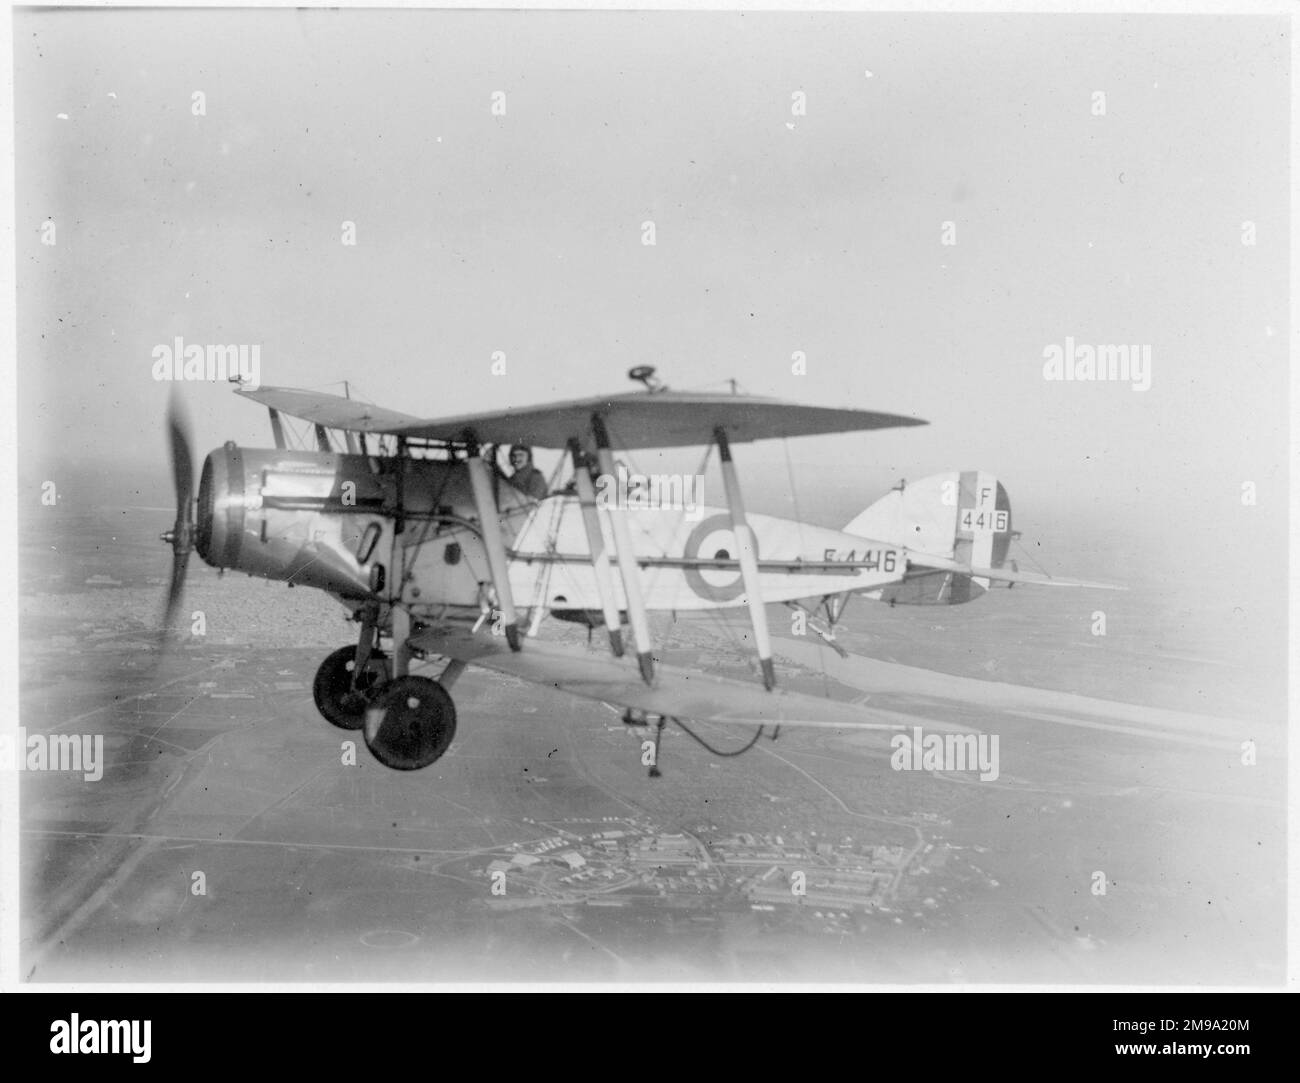 Royal Air Force Bristol F.2B F4416, somewhere in the Middle East Stock Photo